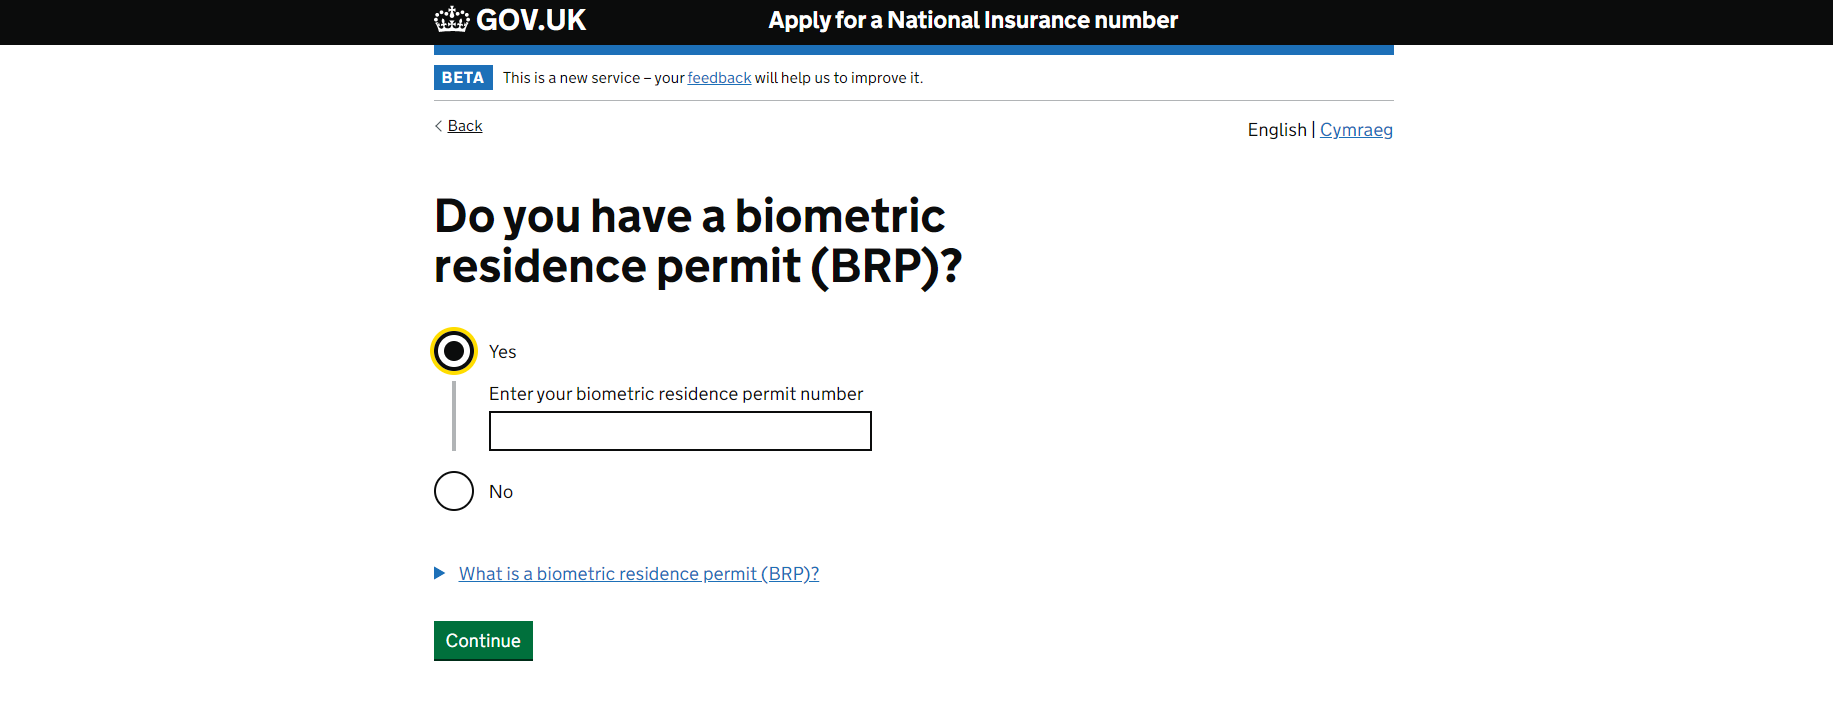 Biometric Residence Permit (BRP) Question